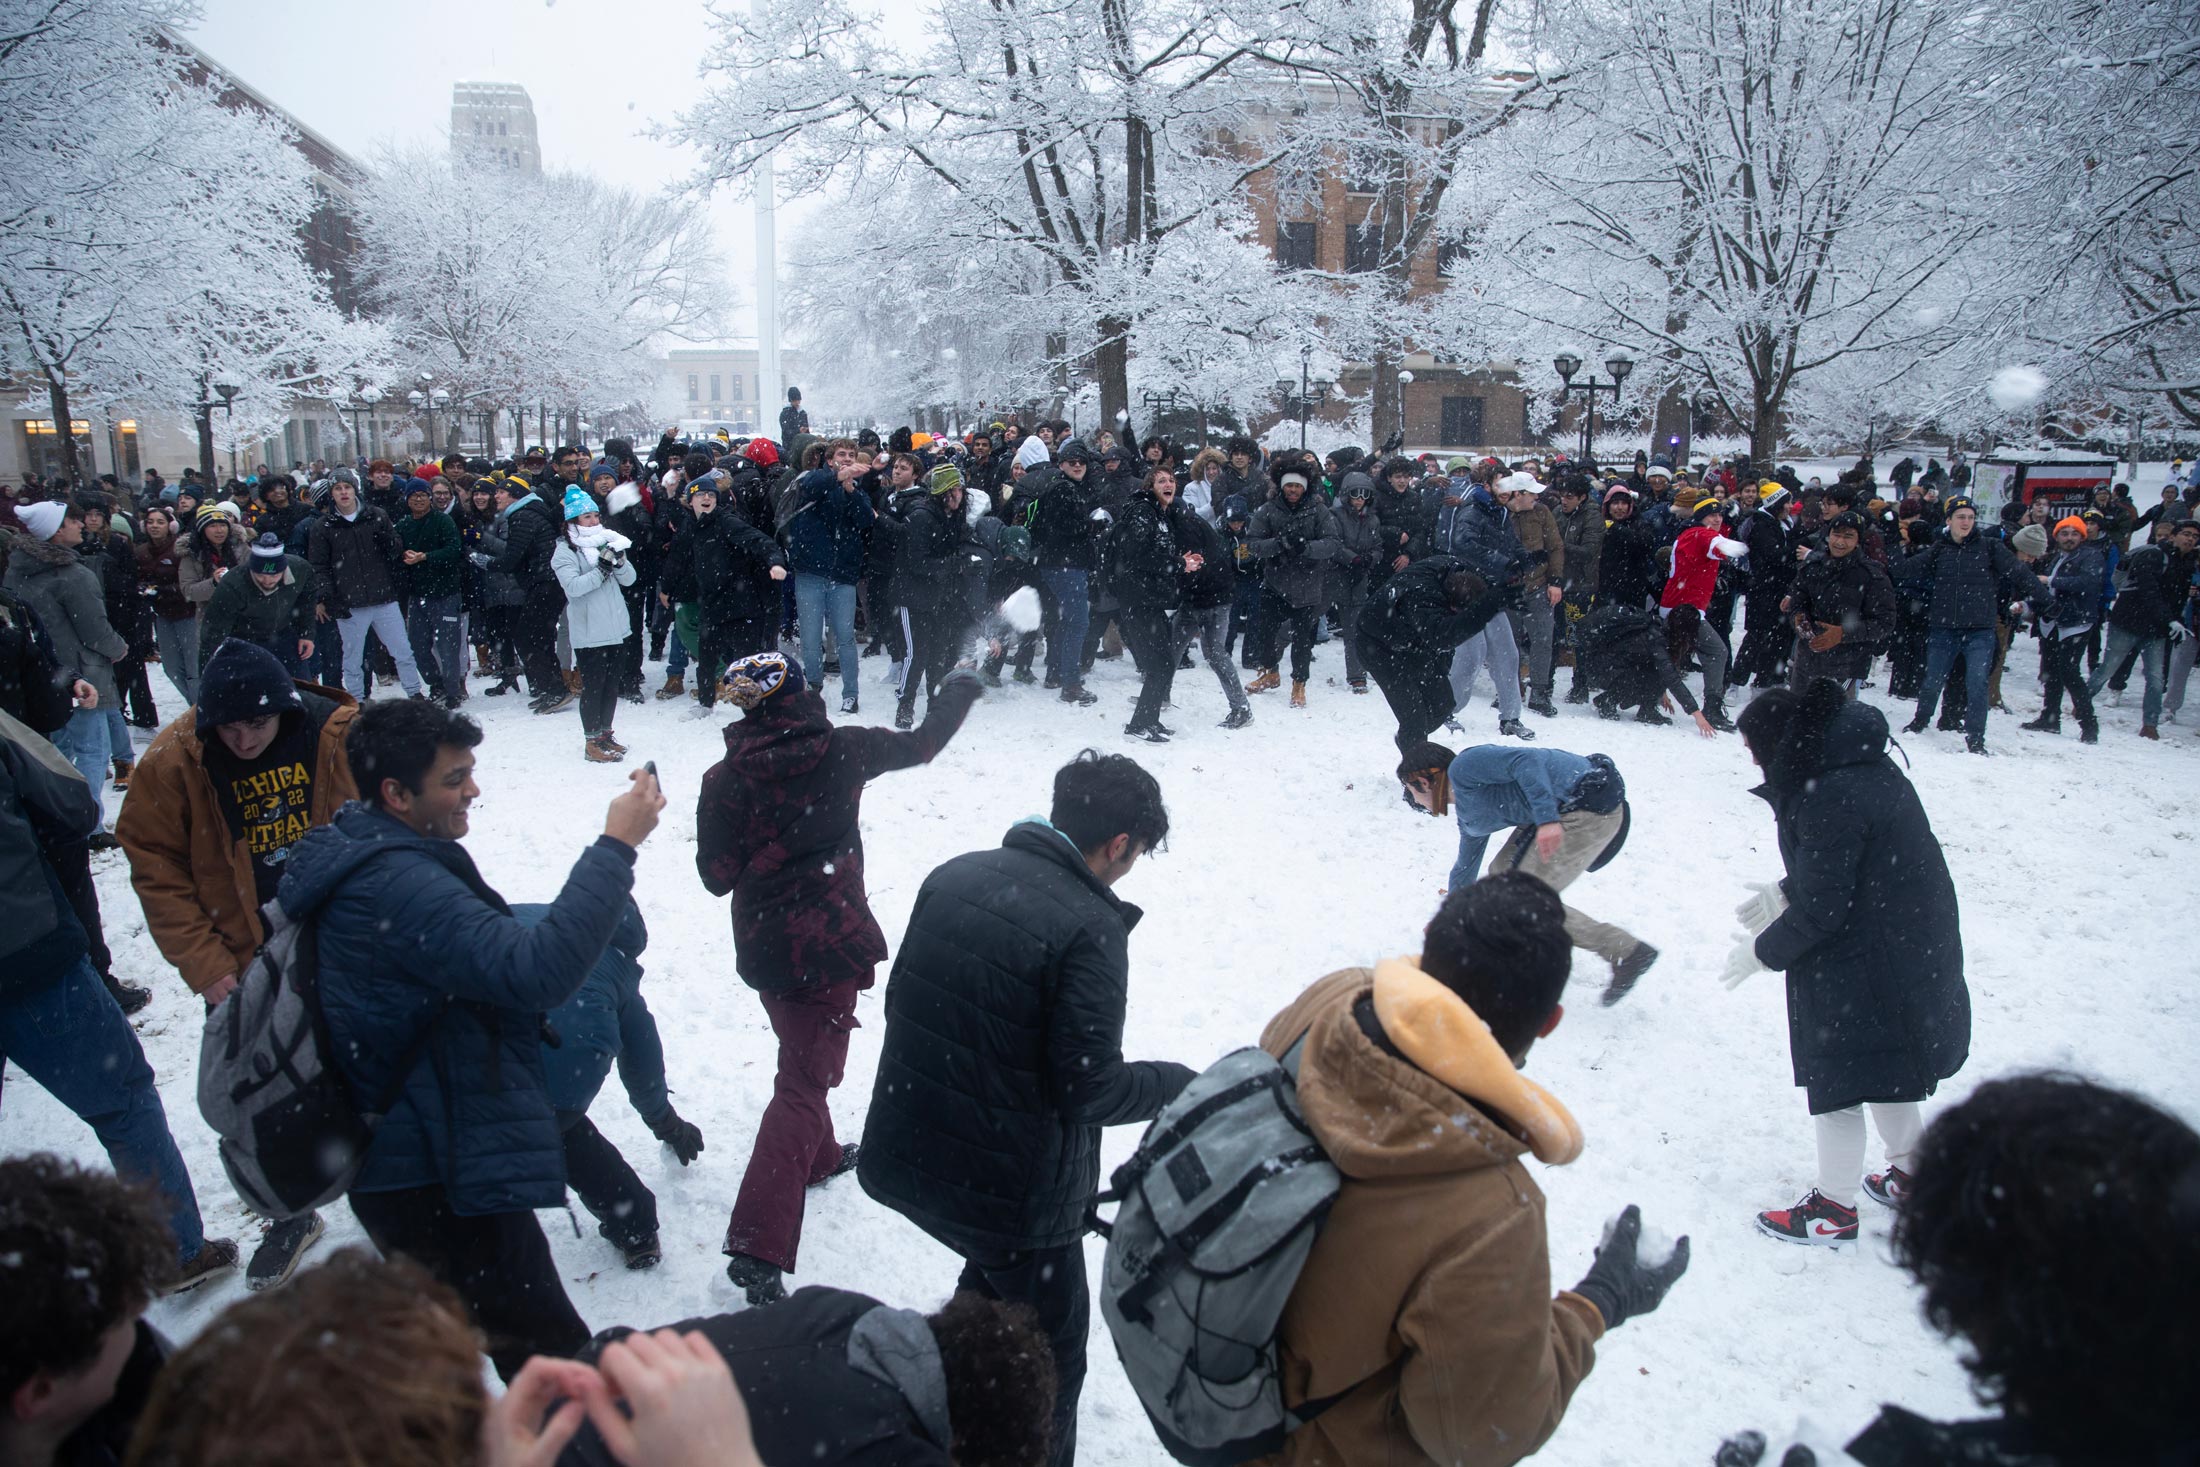 A large group of people participate in an outdoor snowball fight surrounded by snow-covered trees and buildings. Snowballs are being thrown and are in mid-air.